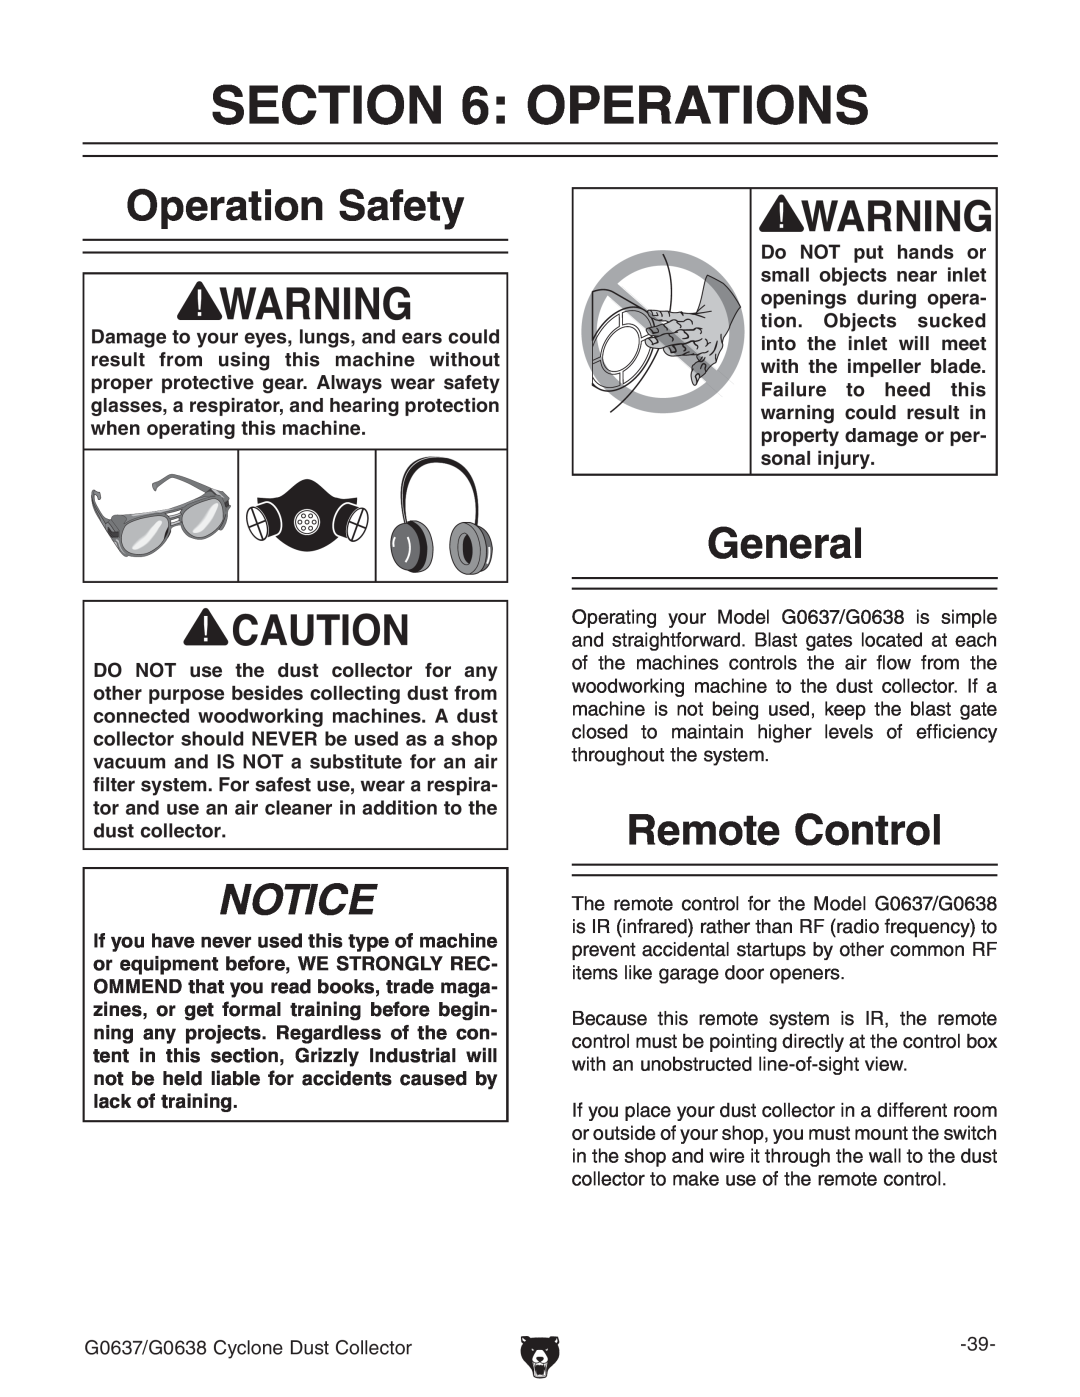 Grizzly G0638, G0637 owner manual Operations, Operation Safety, Remote Control, Notice, General 